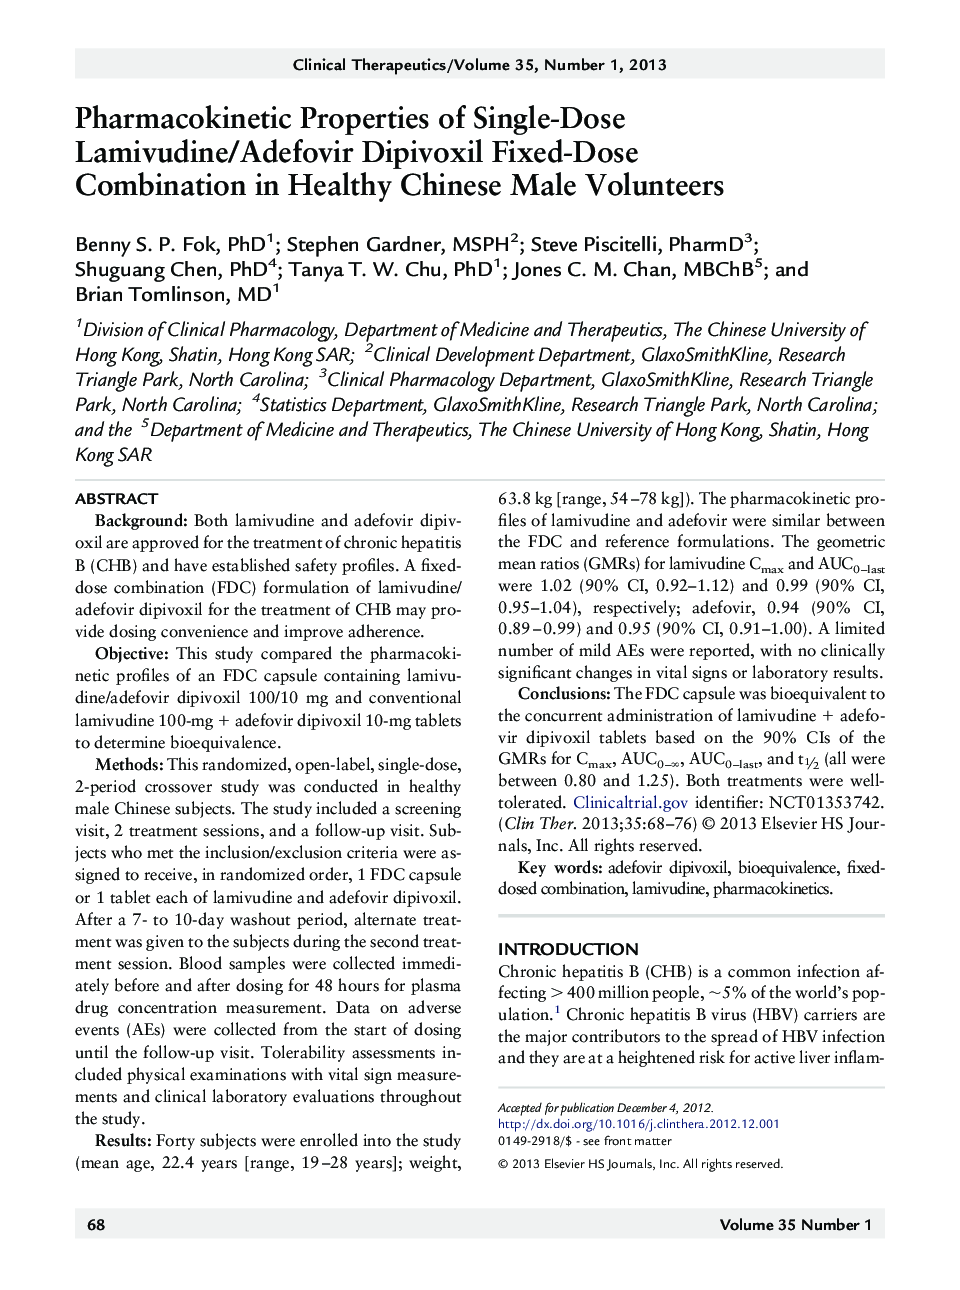 Pharmacokinetic Properties of Single-Dose Lamivudine/Adefovir Dipivoxil Fixed-Dose Combination in Healthy Chinese Male Volunteers